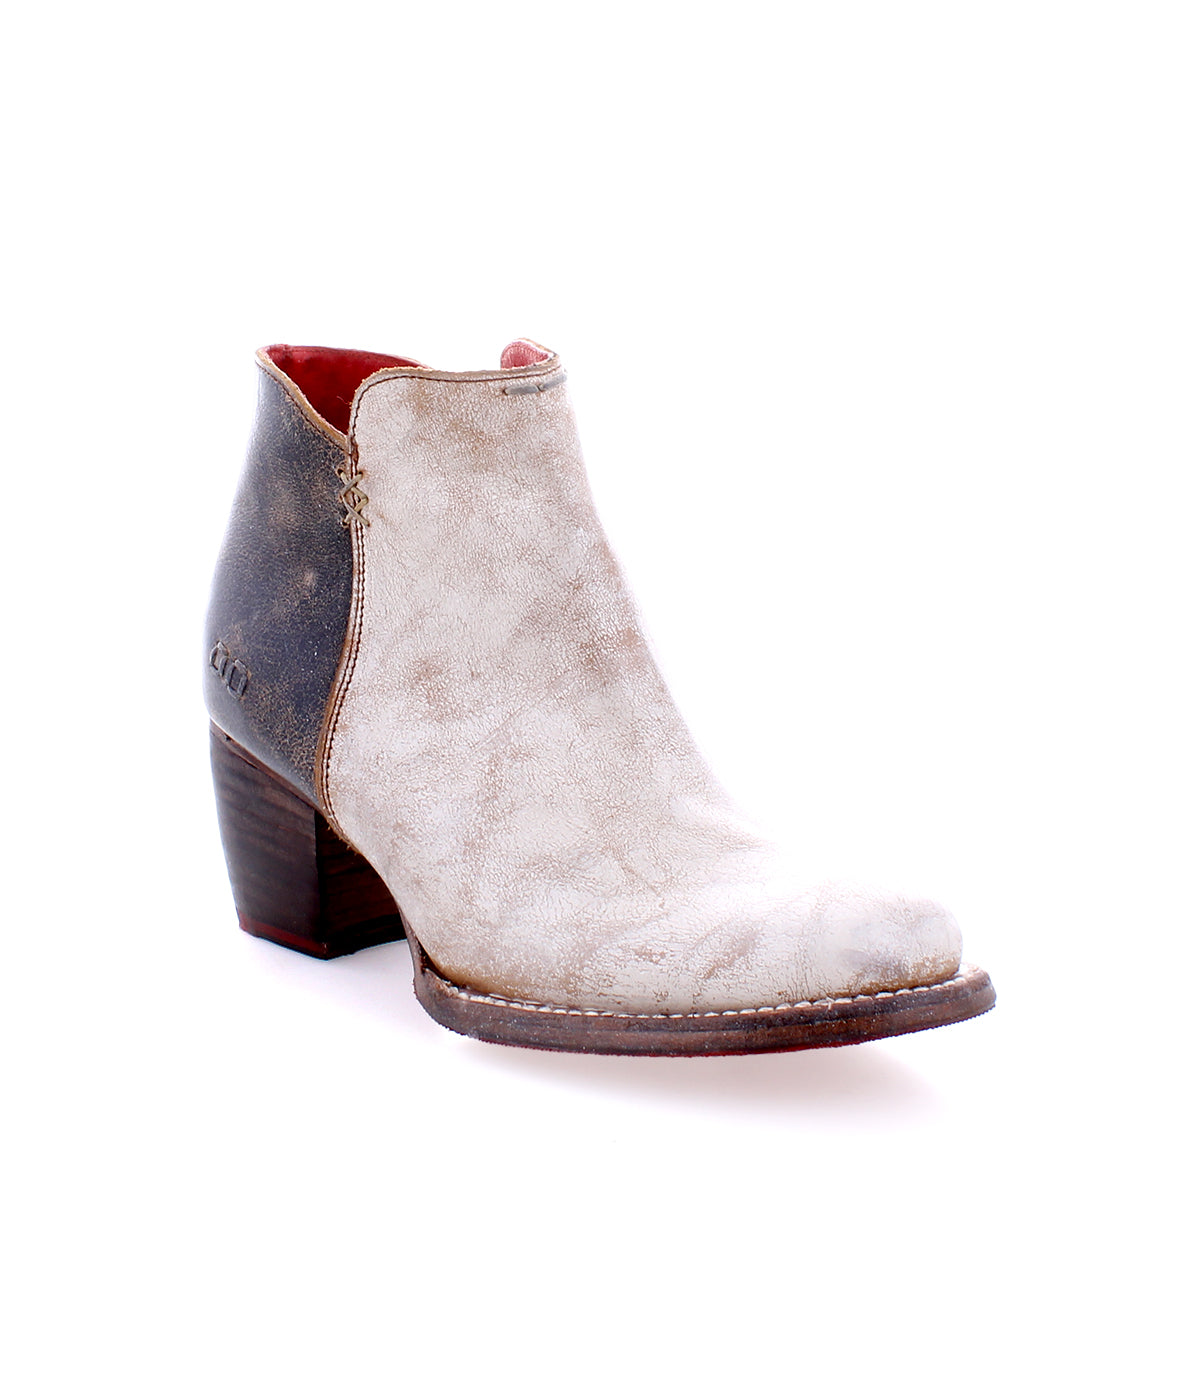 A durable women's Yell ankle boot handcrafted in white and black leather by Bed Stu.